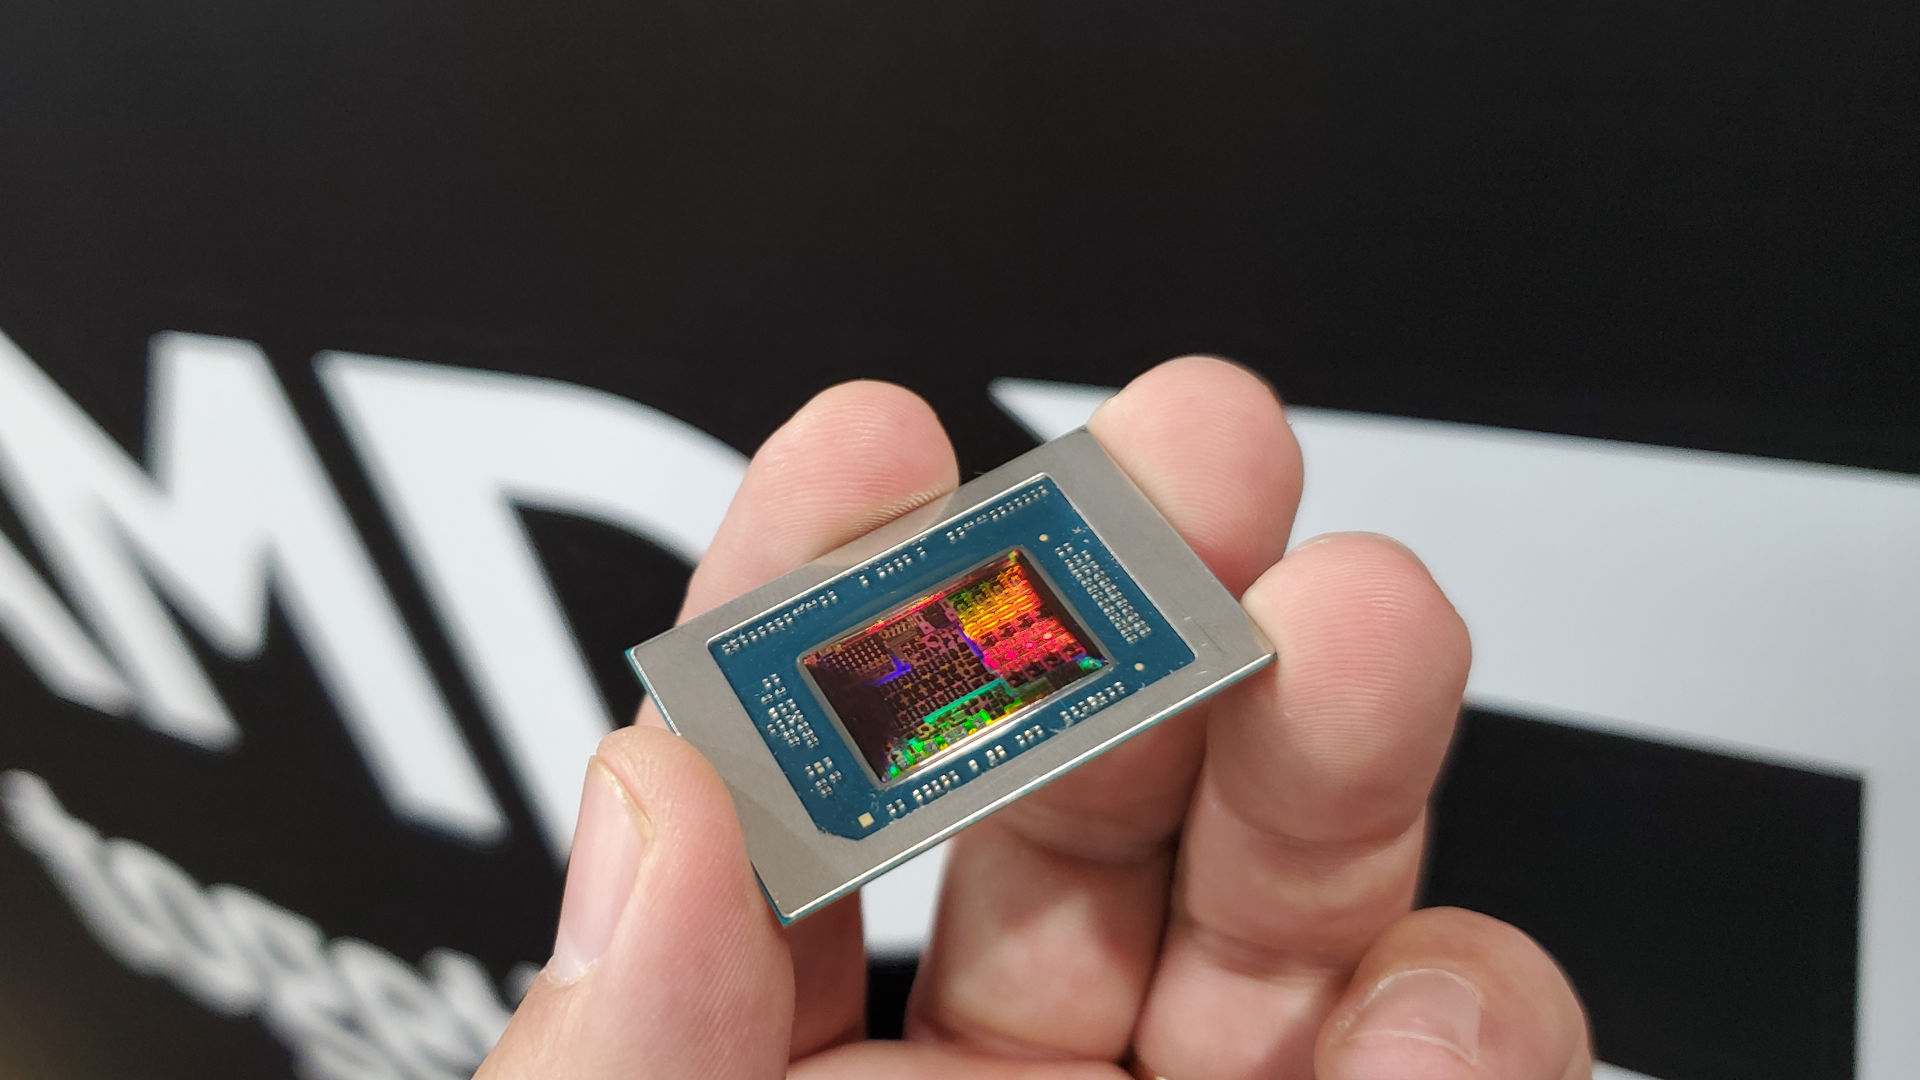  AMD's new 890M mobile GPU could be over 30% faster than the 780M currently used in most handheld gaming PCs 